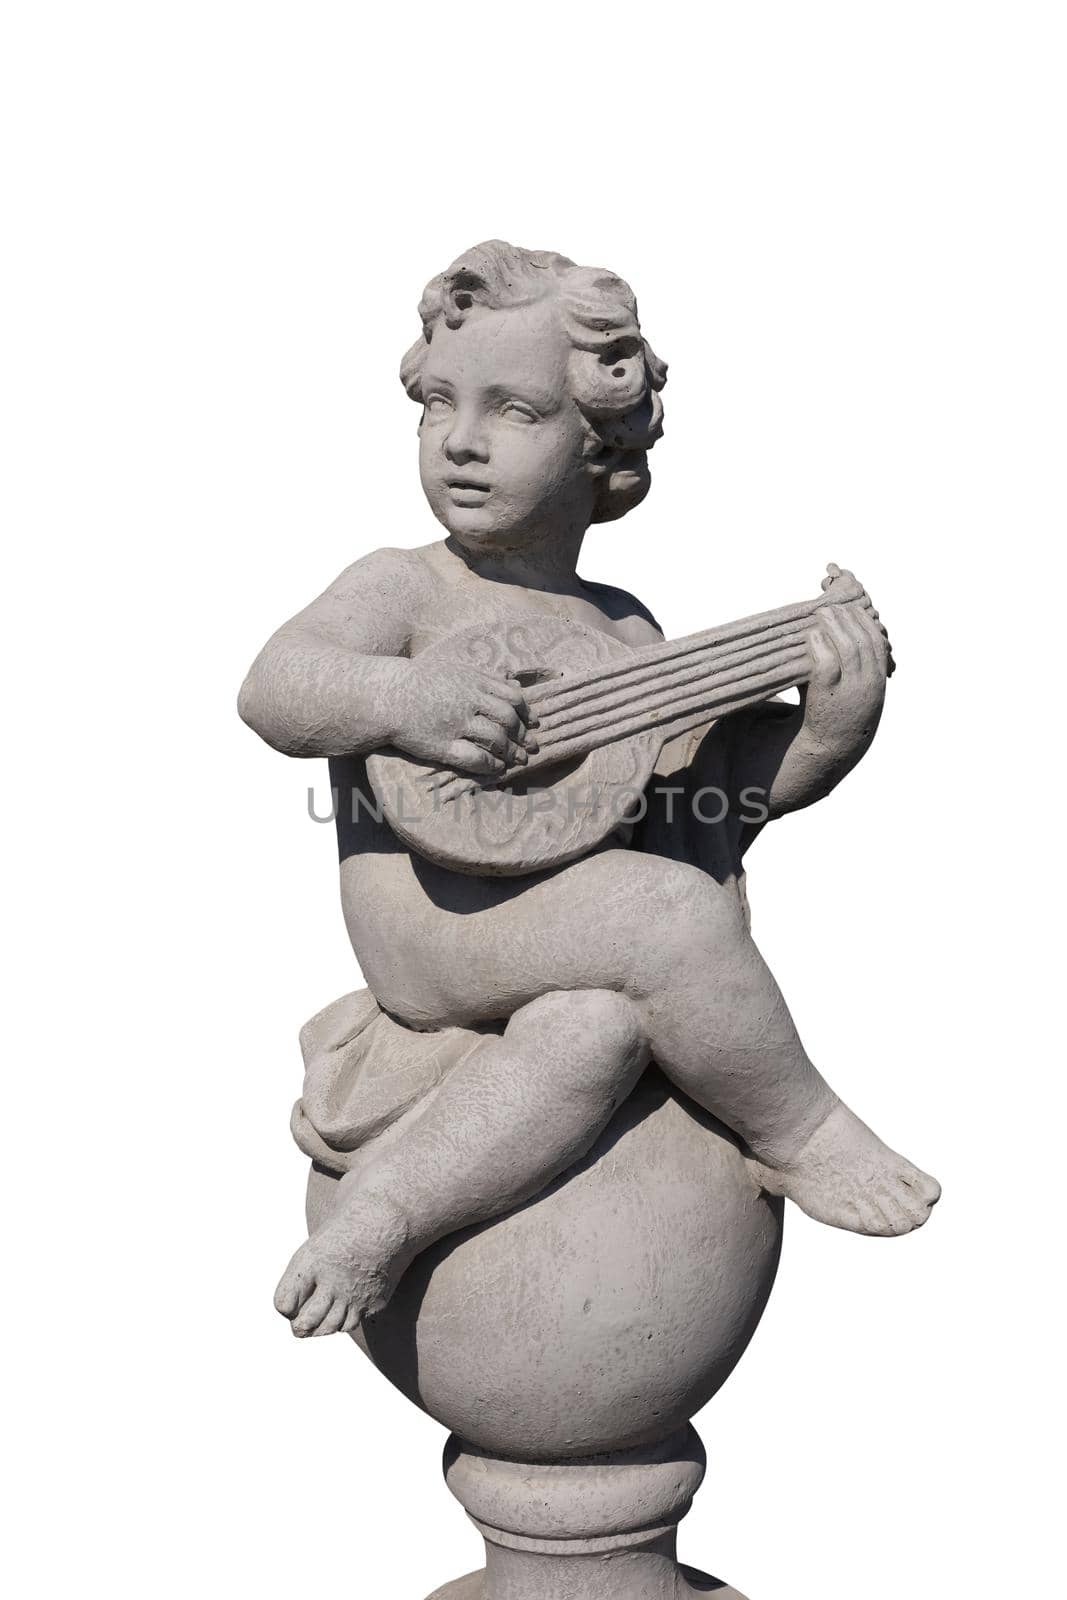 Ancient stone sculpture of naked cherub playing lute on white background by Wavebreakmedia